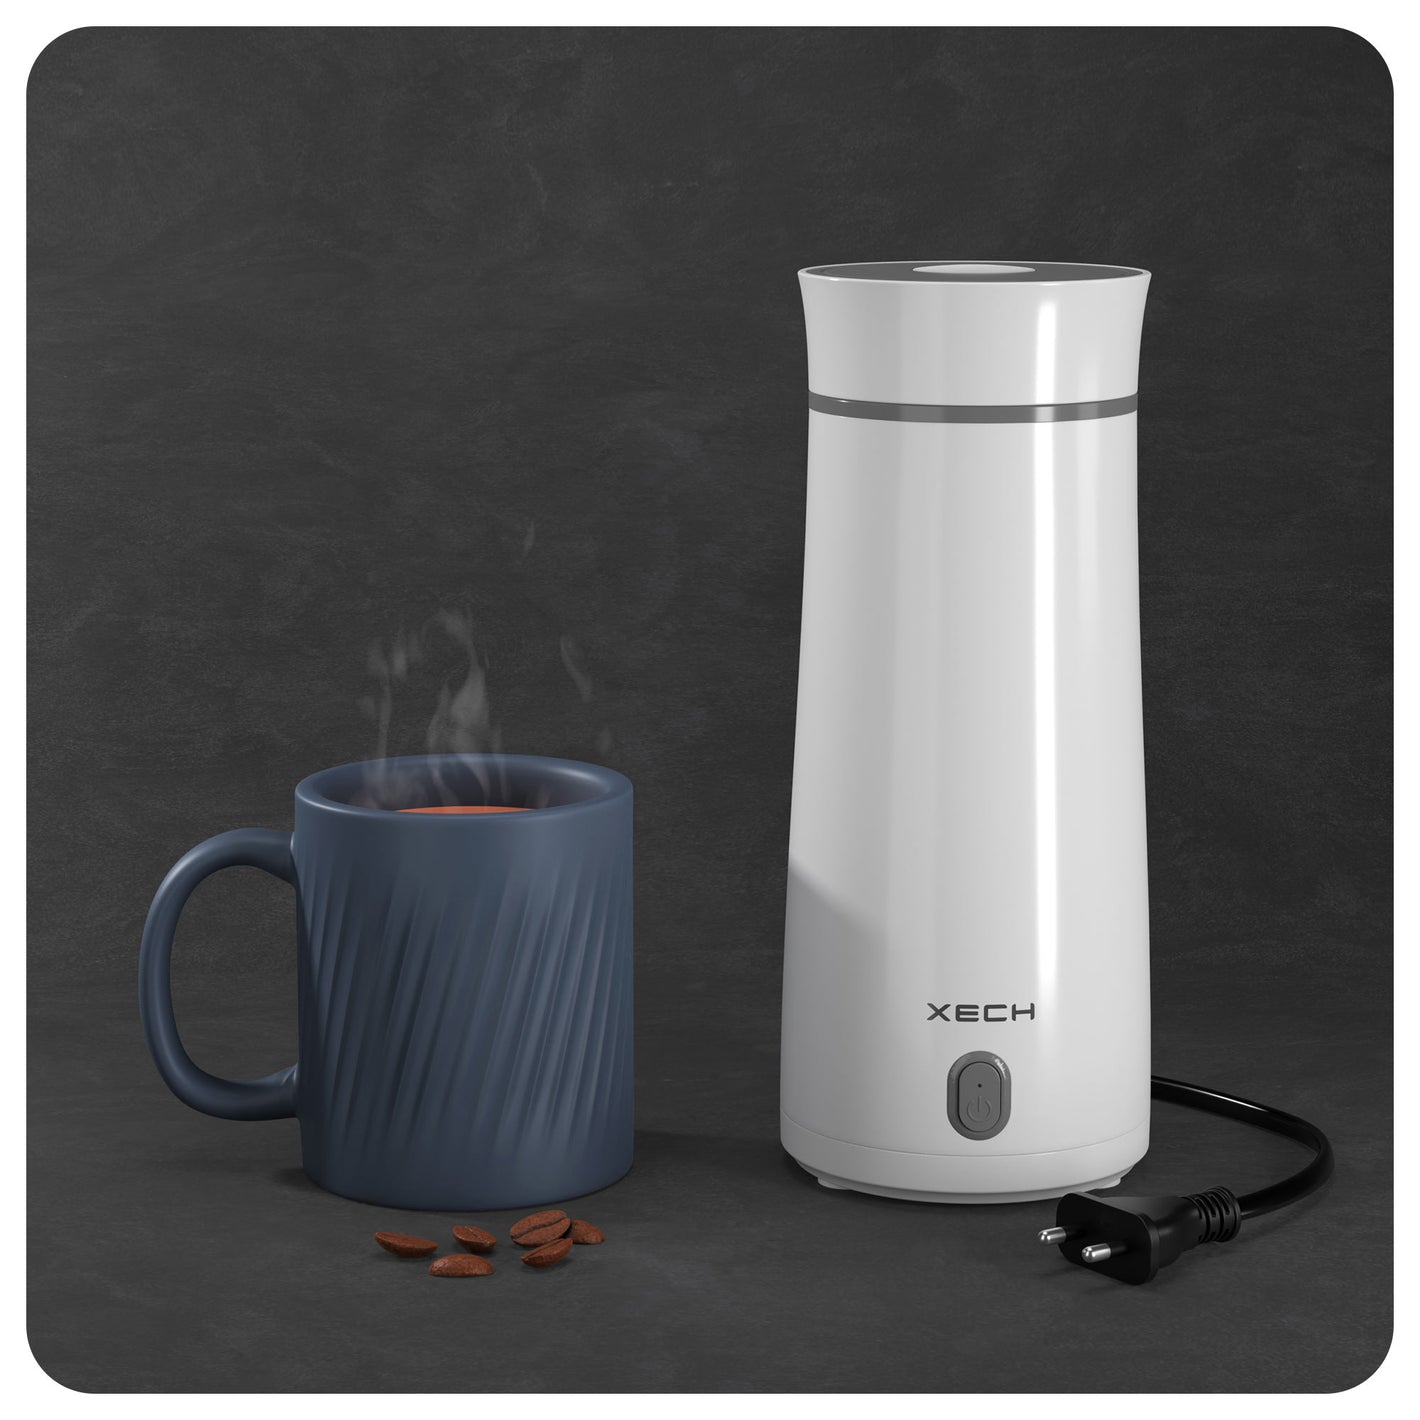 Portable travel kettle for convenient on-the-go tea and coffee by XECH, India's best travel kettle